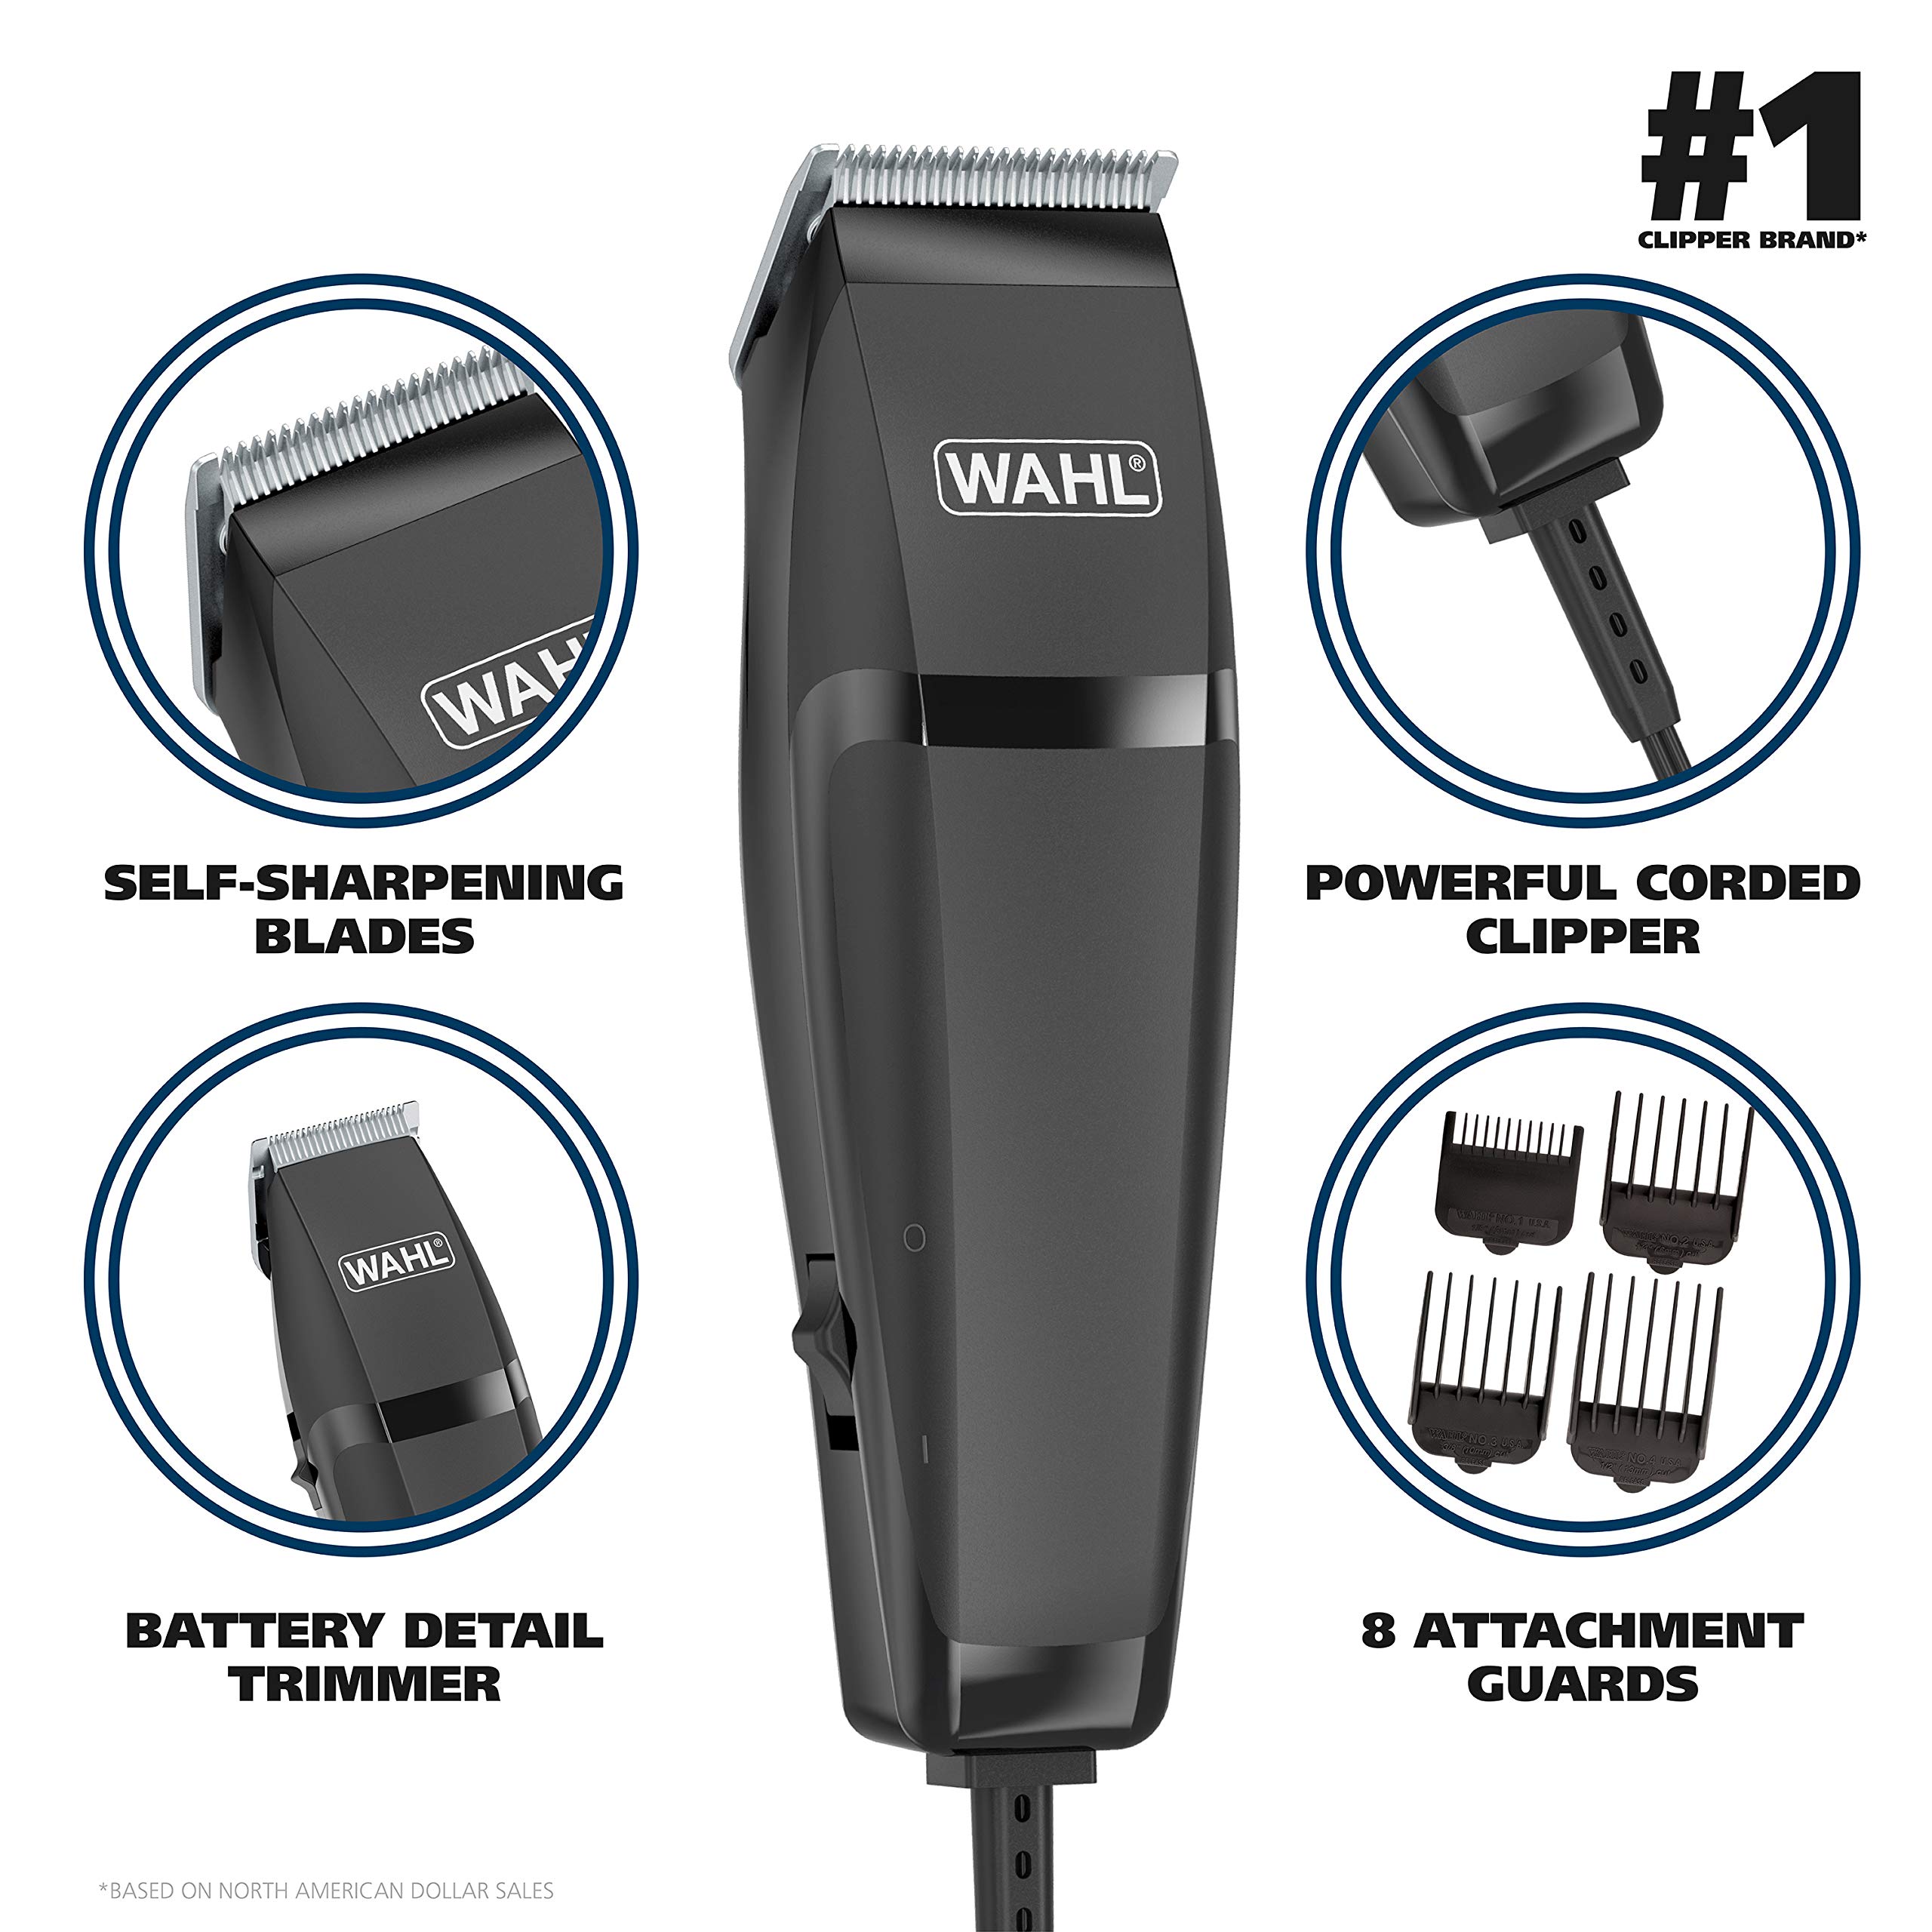 Wahl Clipper Corp Pro 14 Piece Styling Kit with Hair Clipper and Beard Trimmer for Total Body Grooming - Model 79450, Chrome